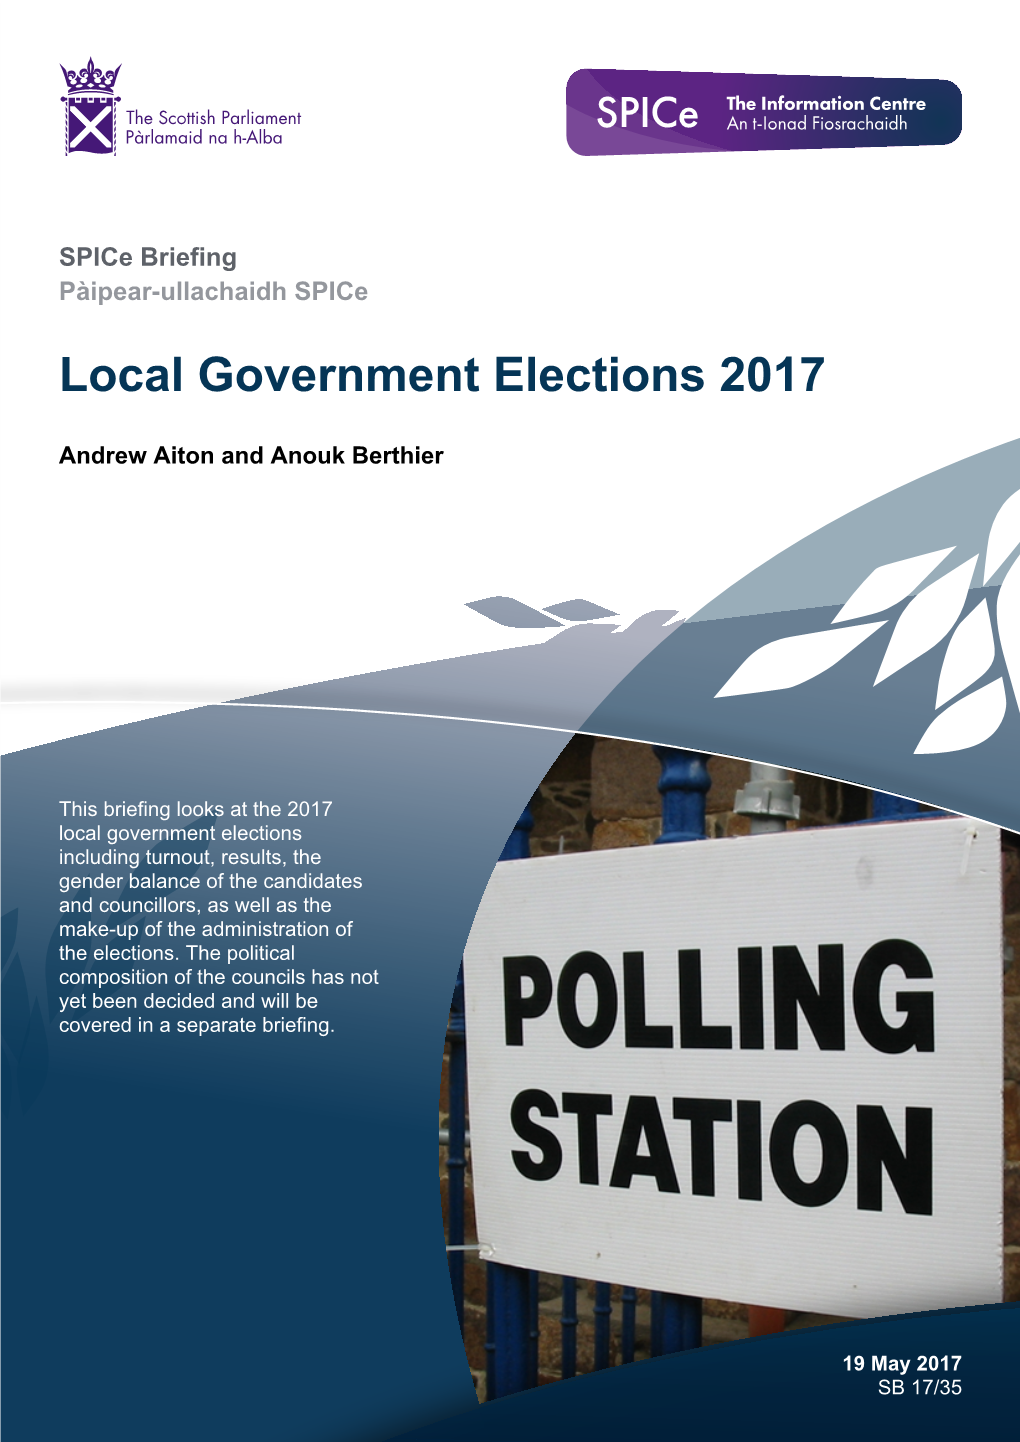 Local Government Elections 2017